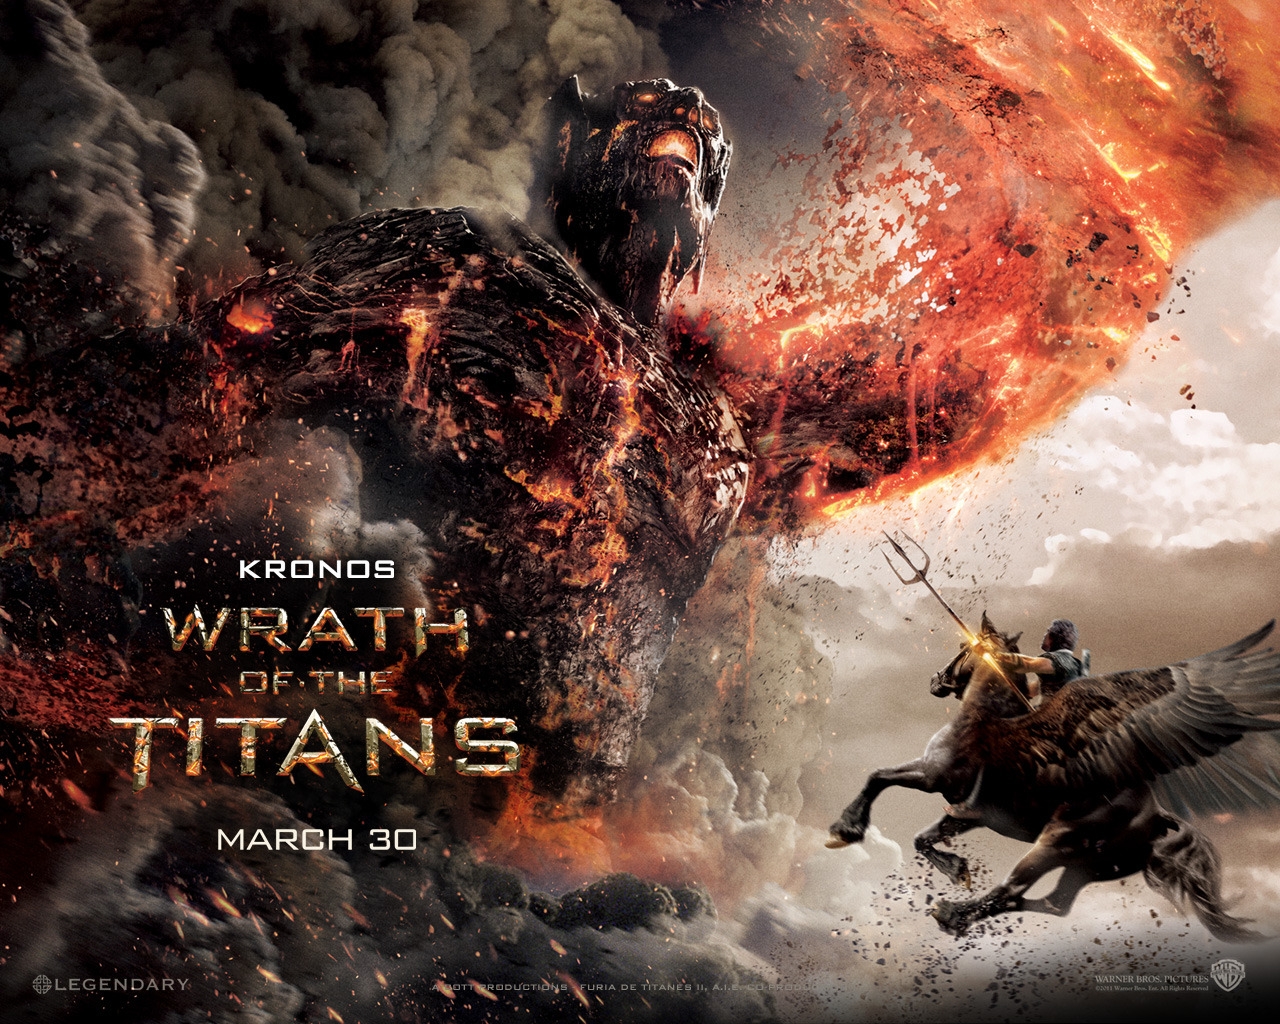 Kronos Wrath of the Titans for 1280 x 1024 resolution